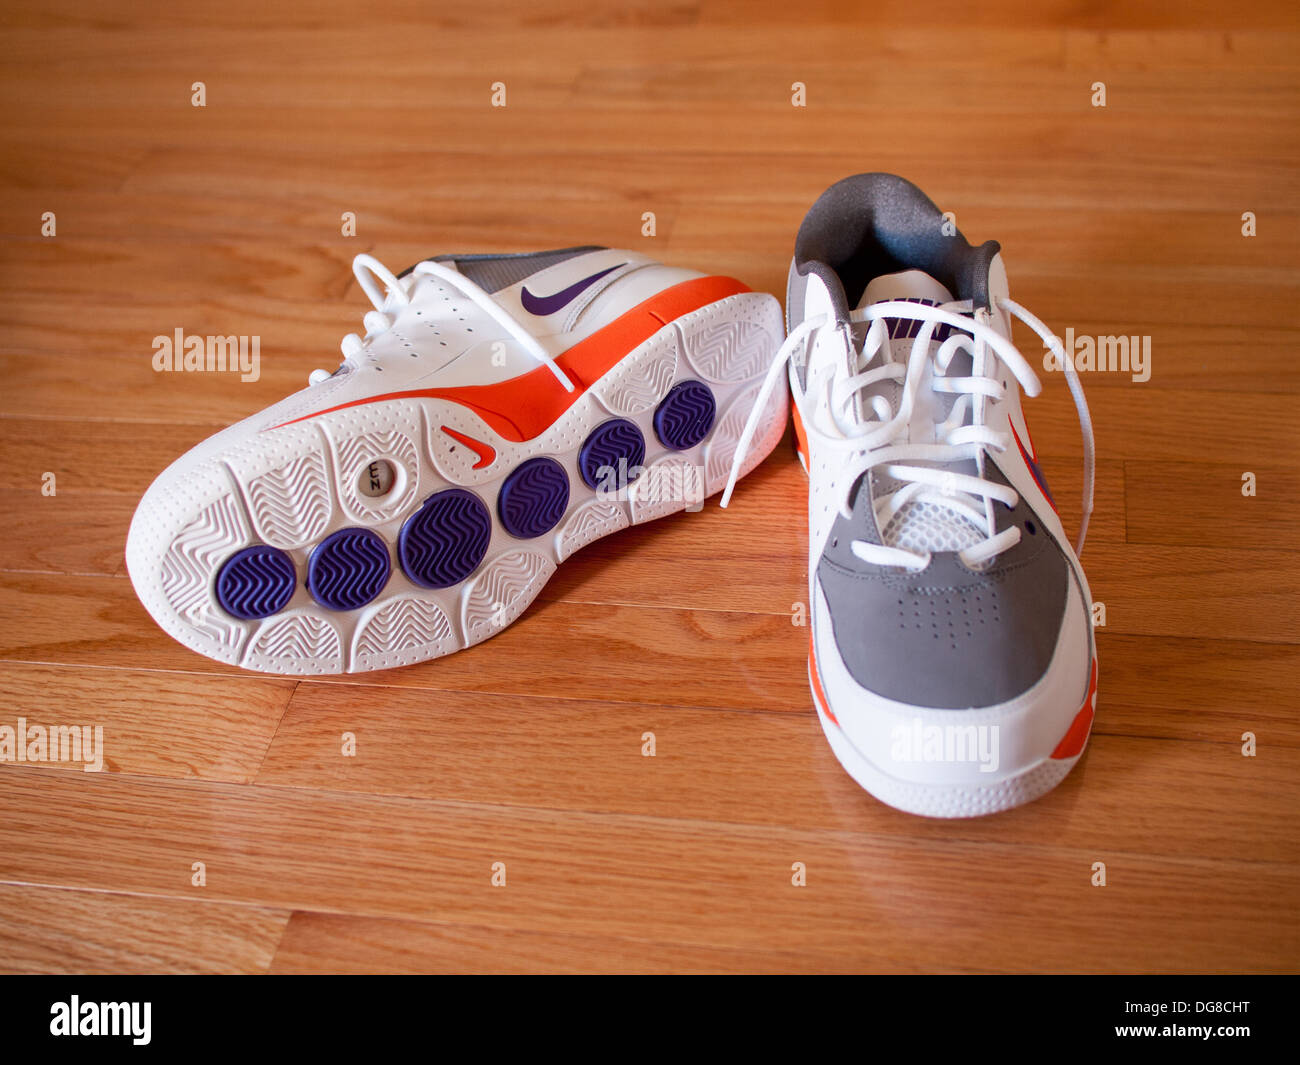 A pair of Nike Zoom Go Low Steve Nash men's basketball shoes. Stock Photo